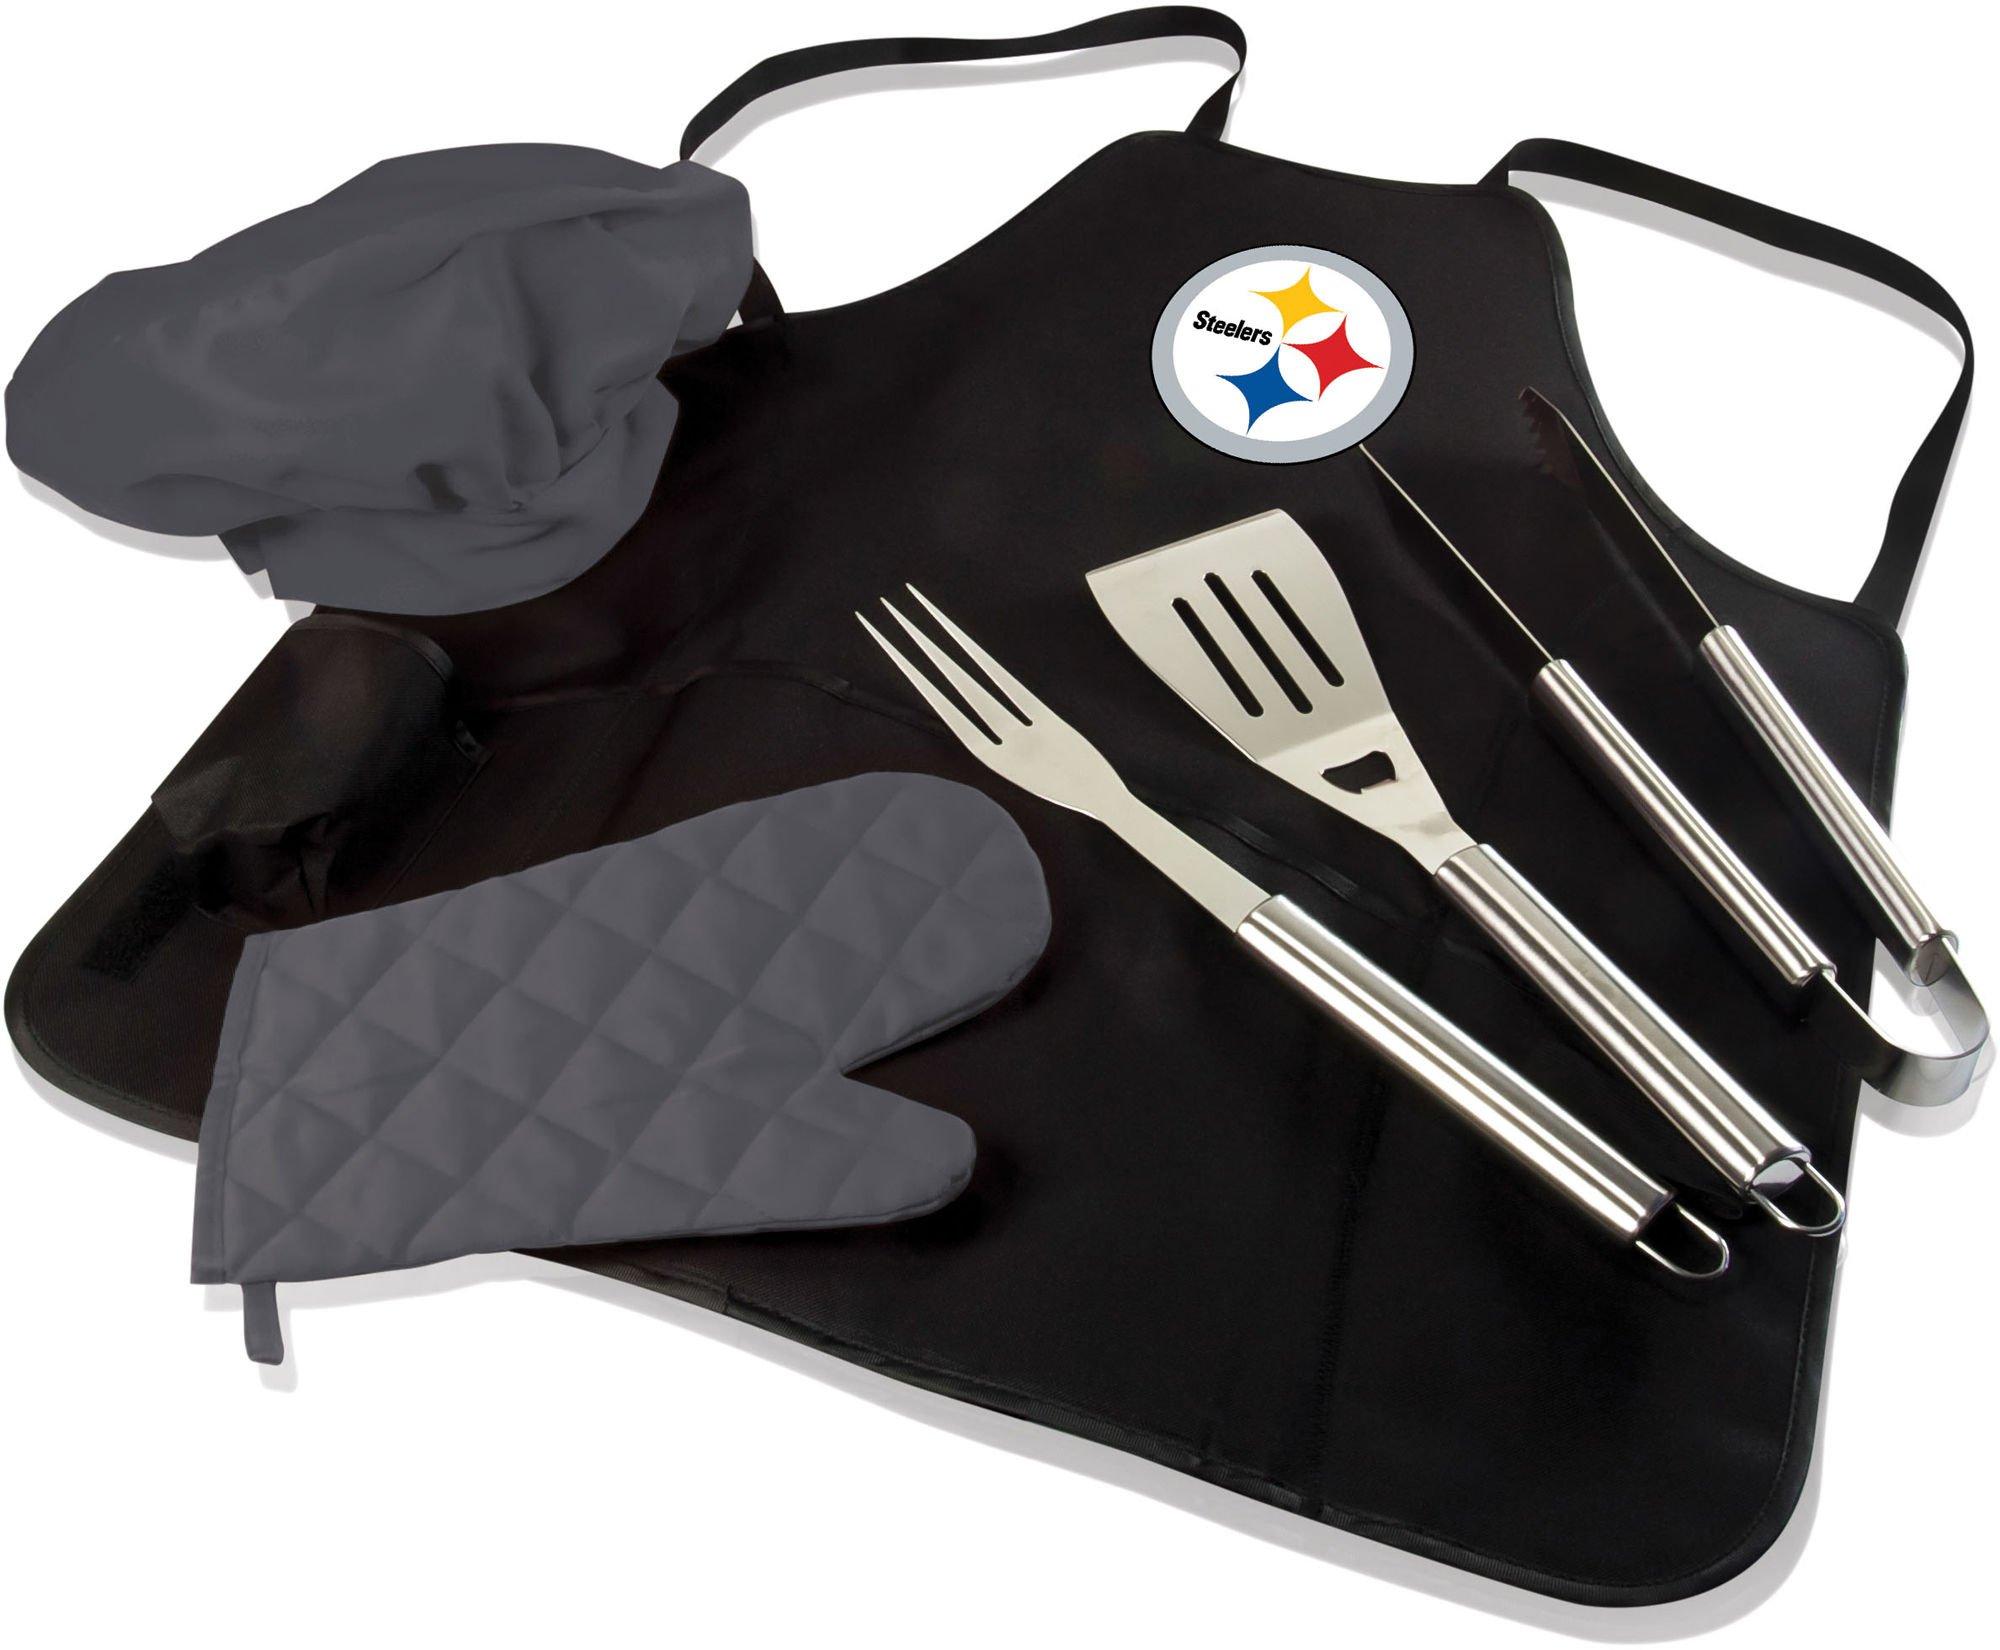 Pittsburgh BBQ Apron Tote Pro by Picnic Time